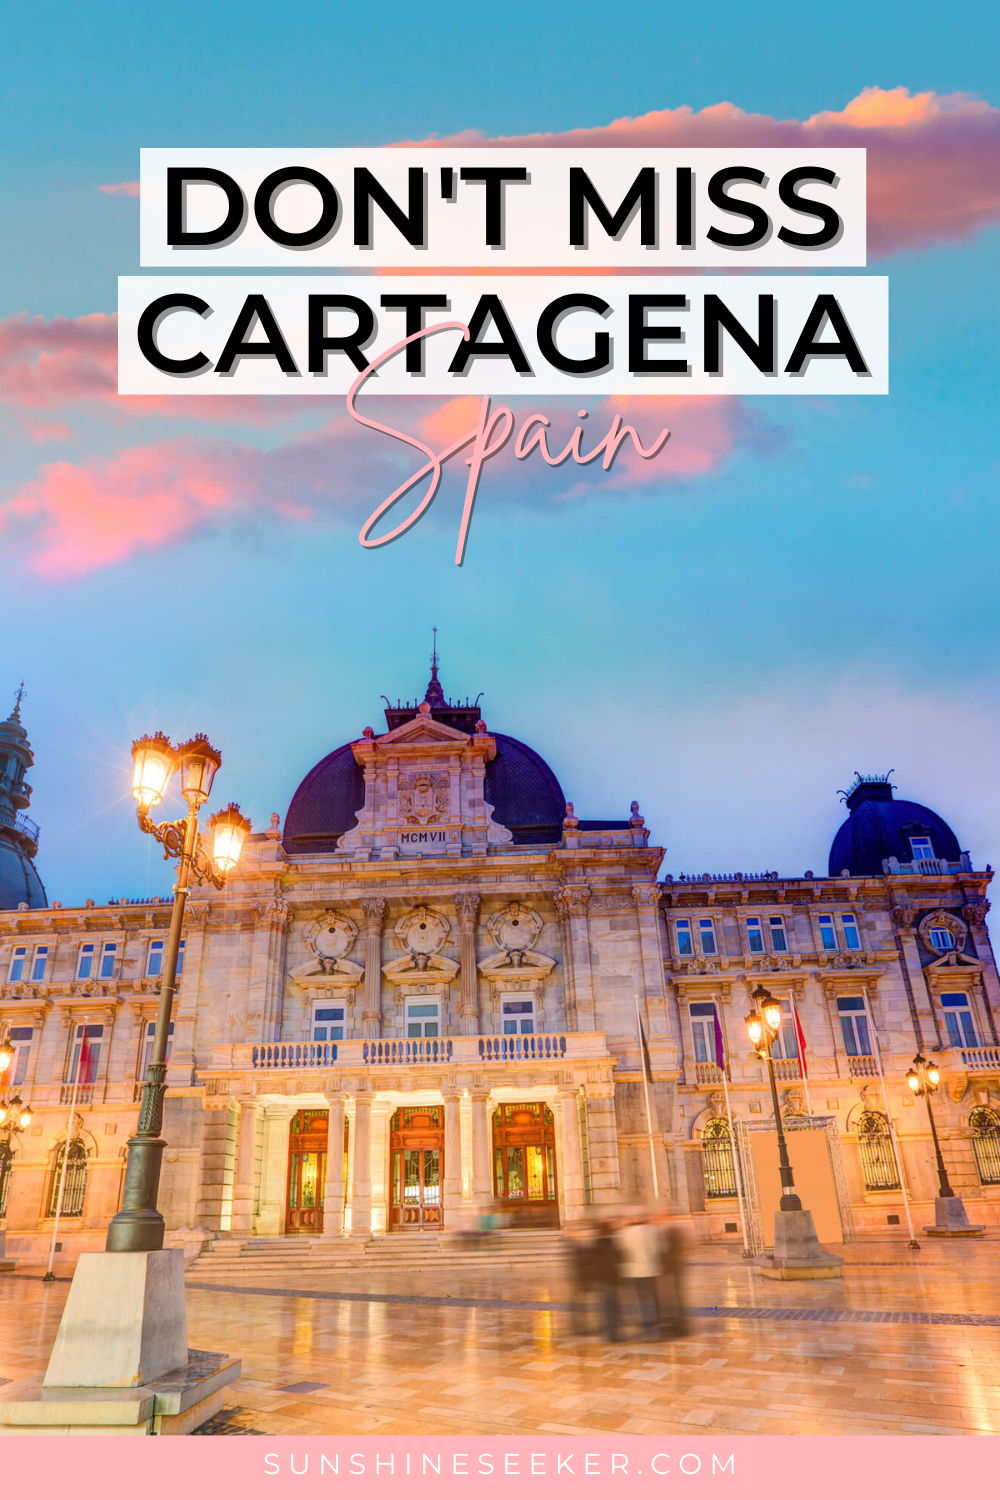 Don't miss the underrated city of Cartagena when you're in Spain. This is still a hidden gem often overlooked by international travelers. Discover all the best things to do in Cartagena and the top tours departing from the Cartagena Spain Cruise Port!